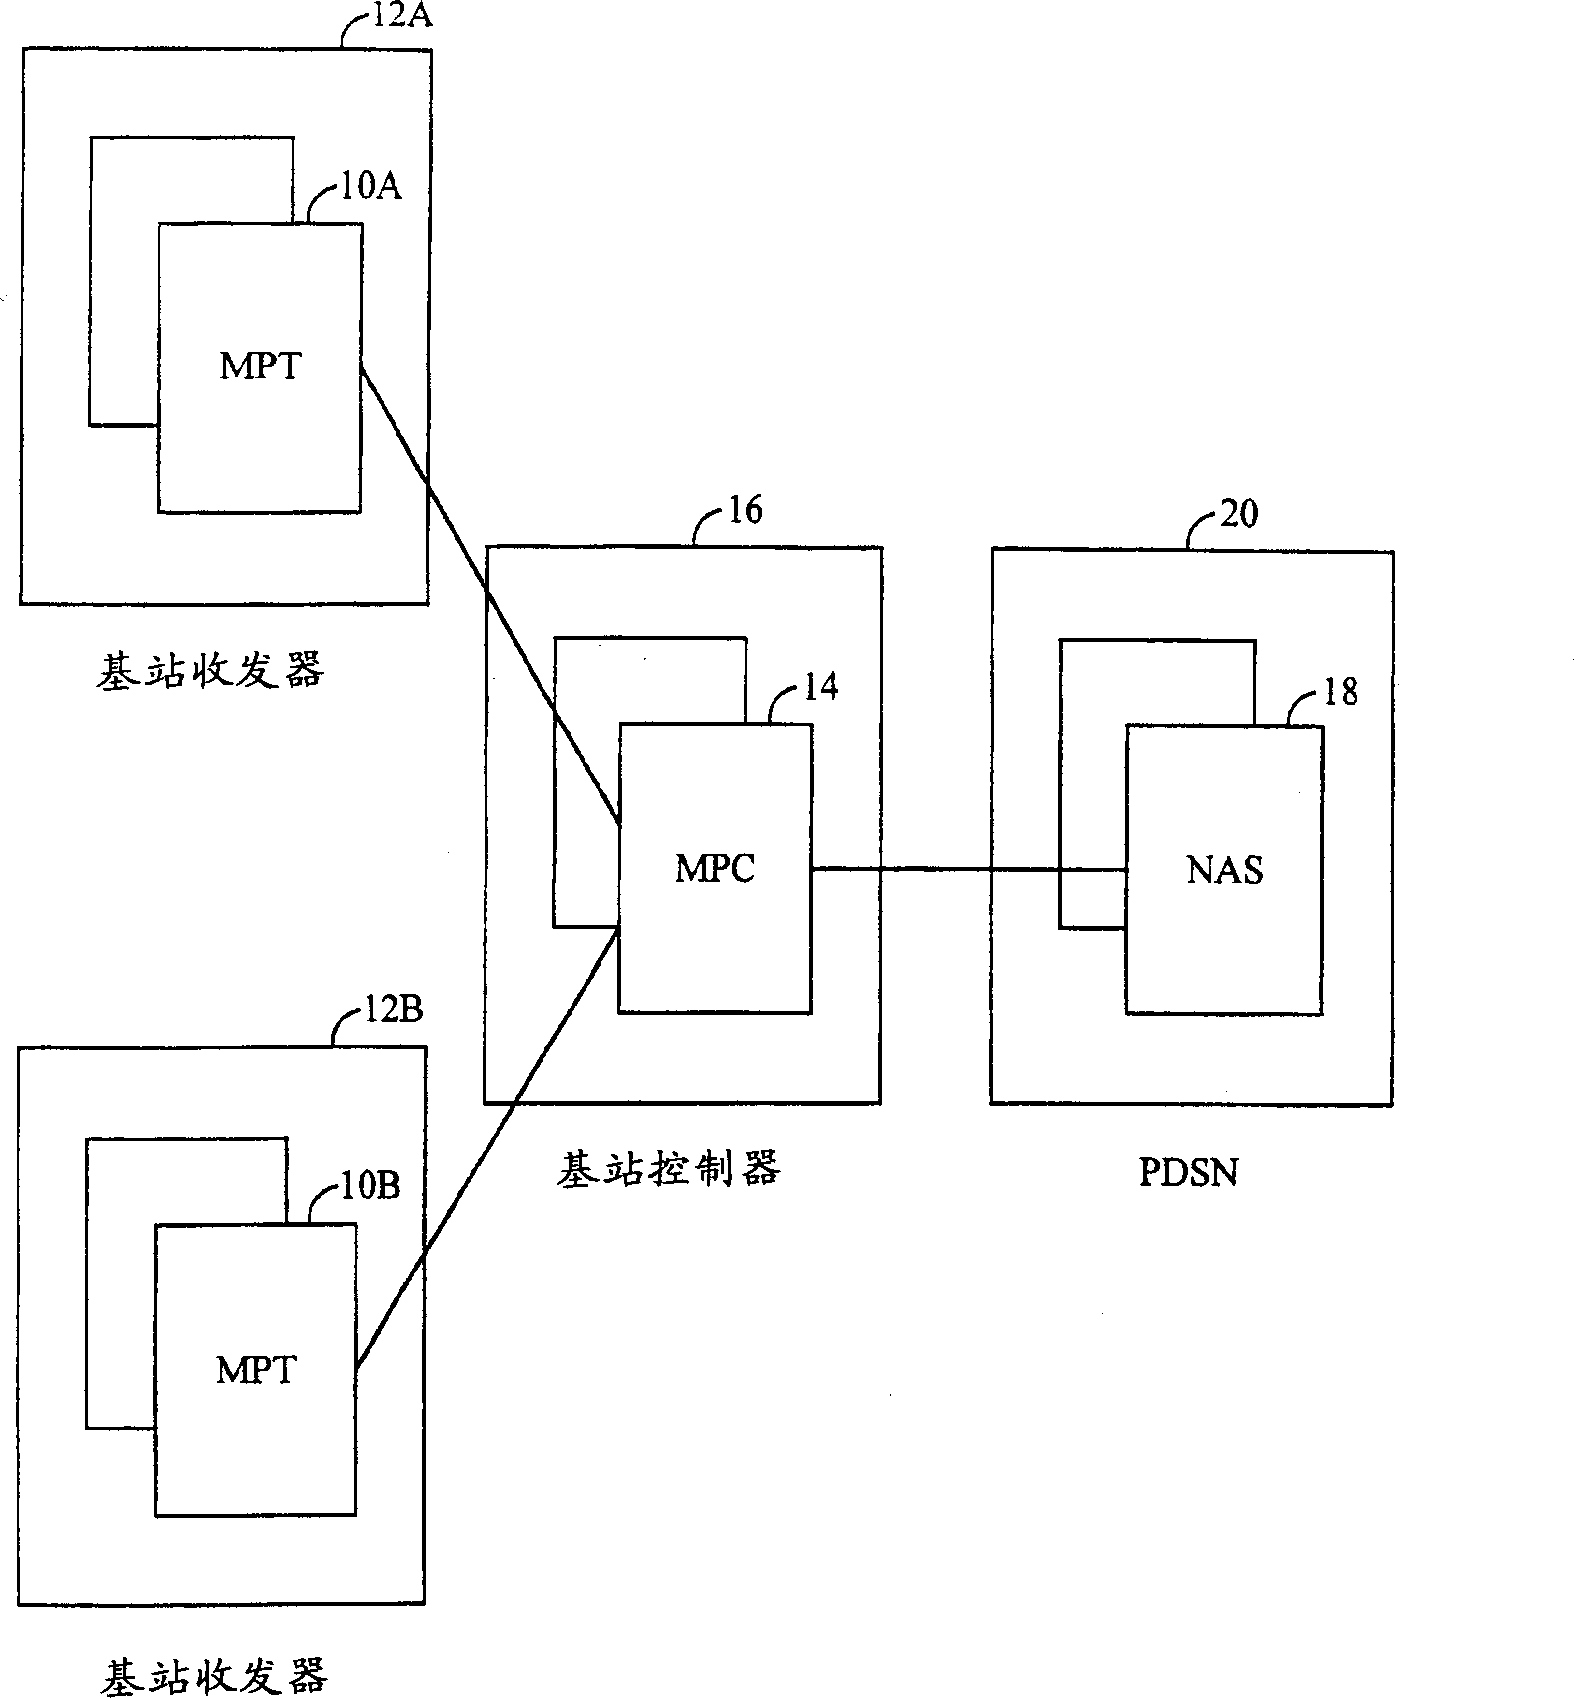 Method and system for querying attributes in a cellular communications system